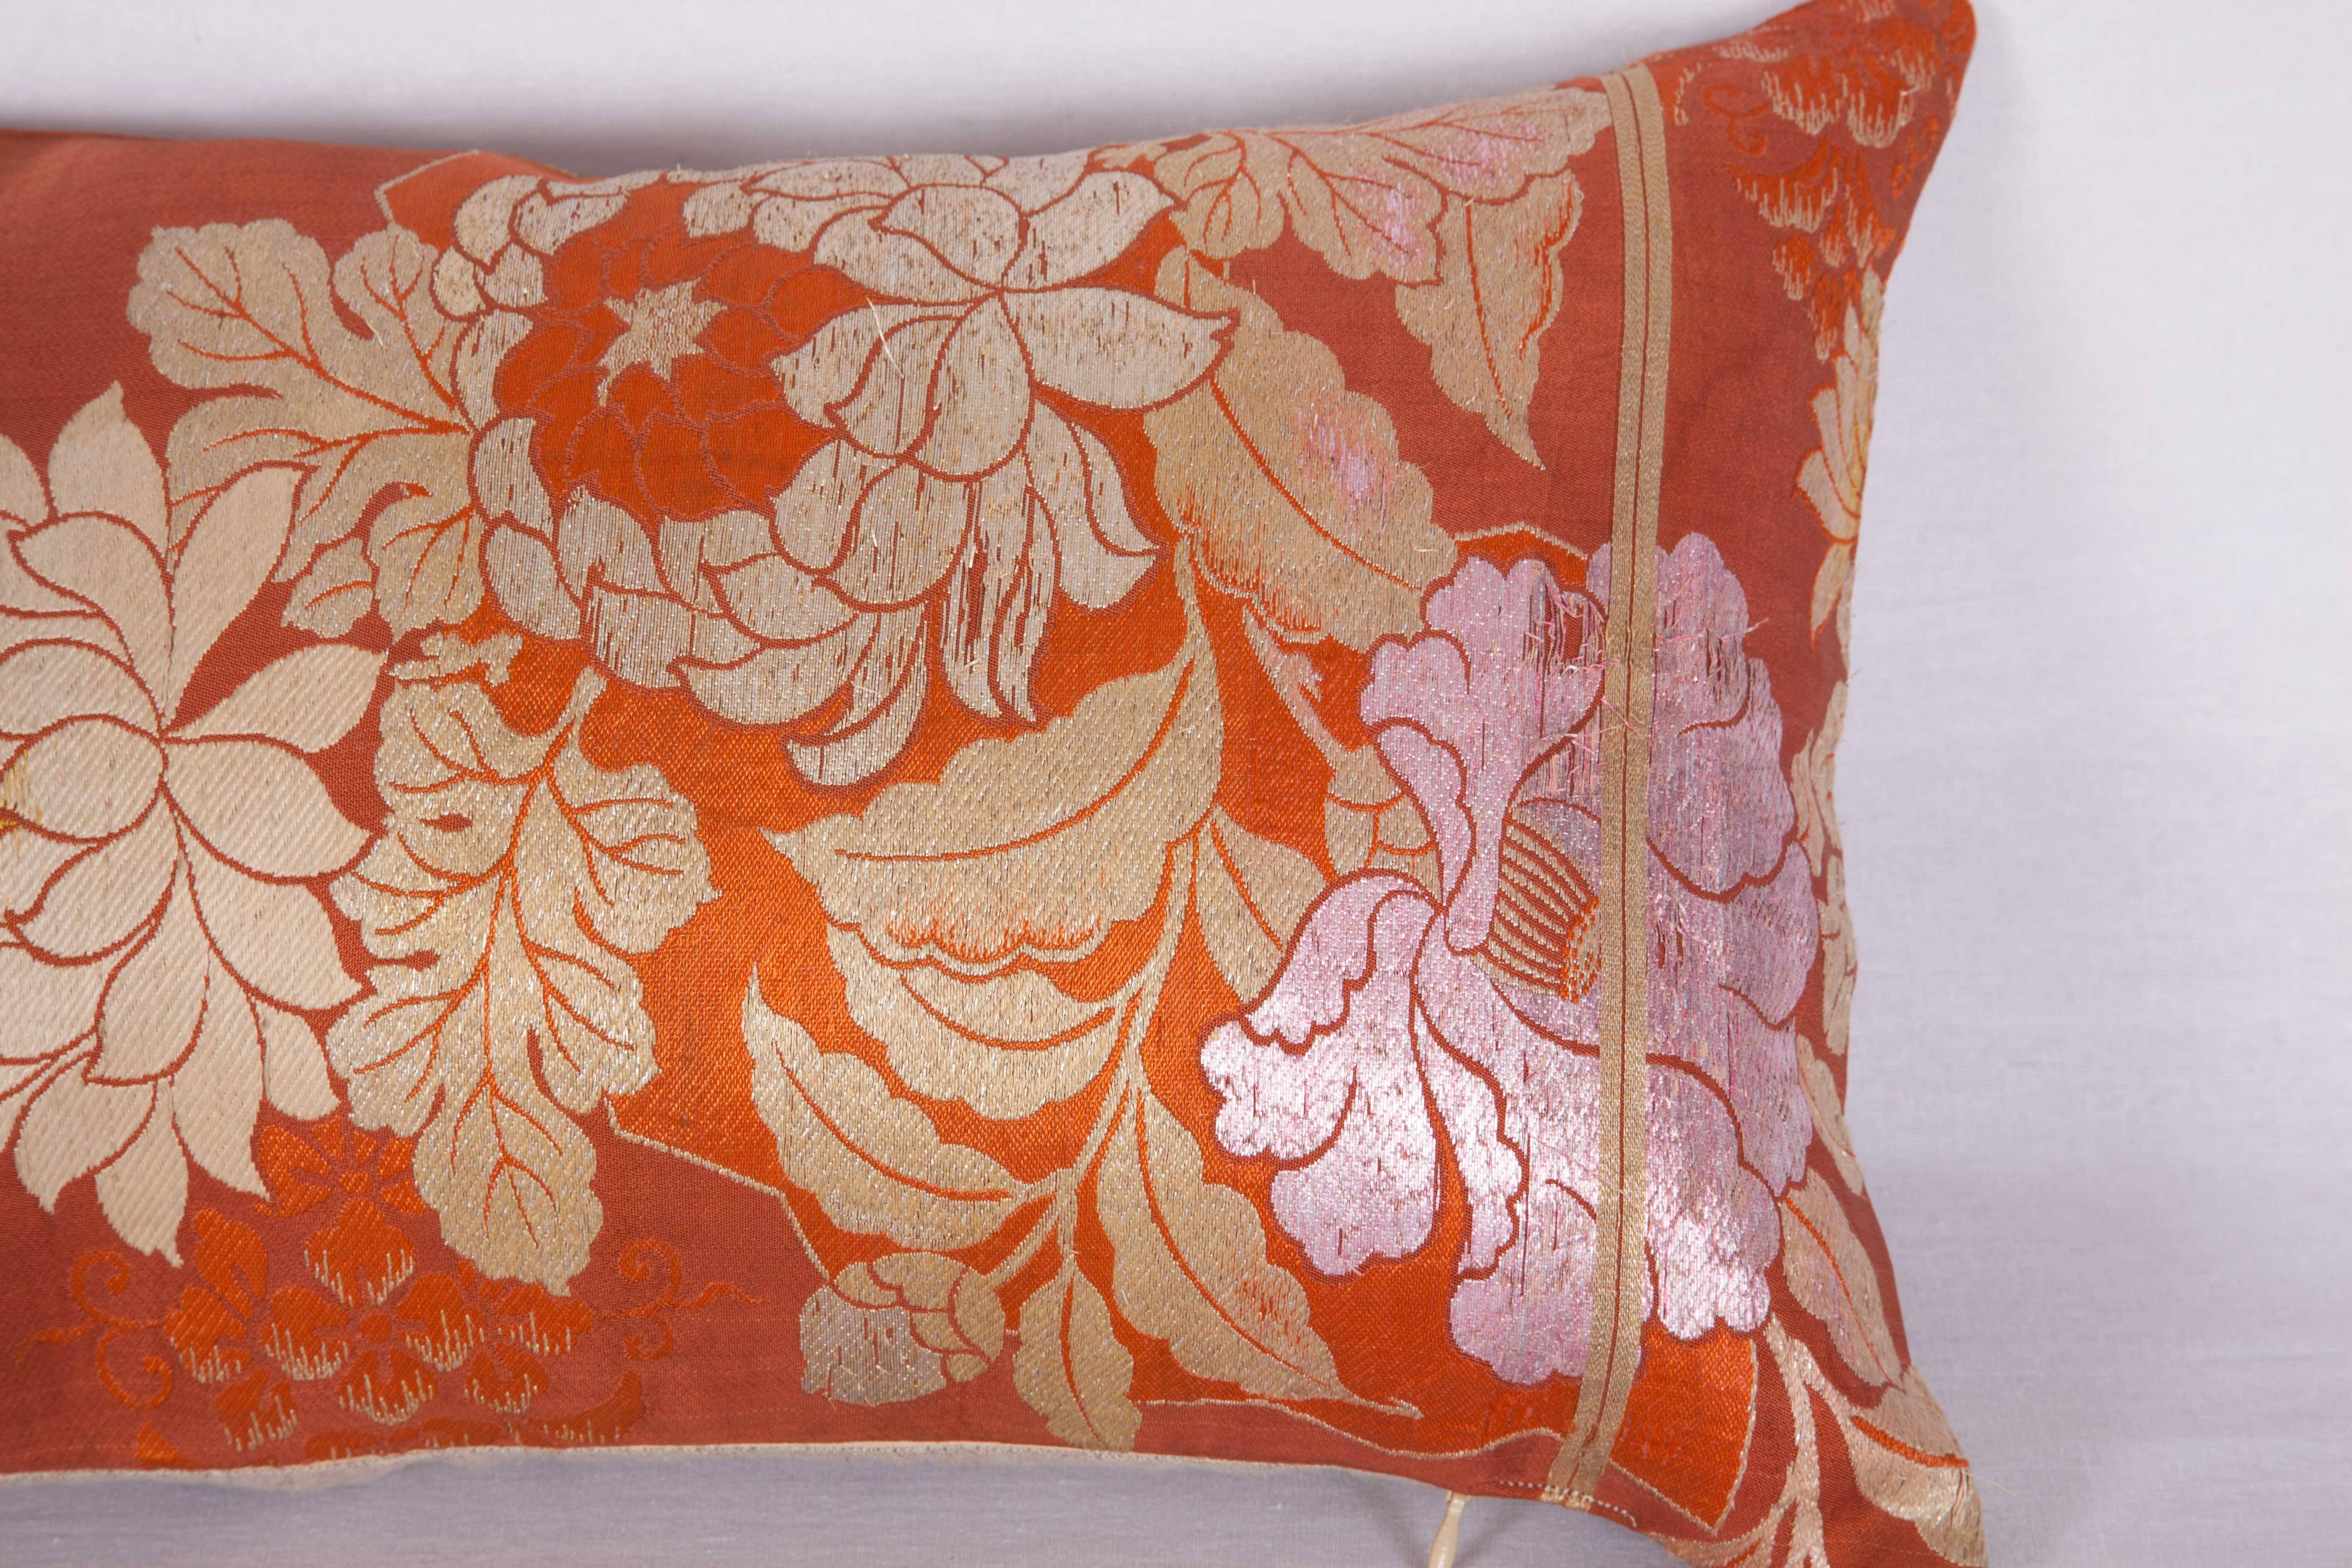 Hand-Woven Pillow Made Out of a Japanese Mid-20th Century Obi